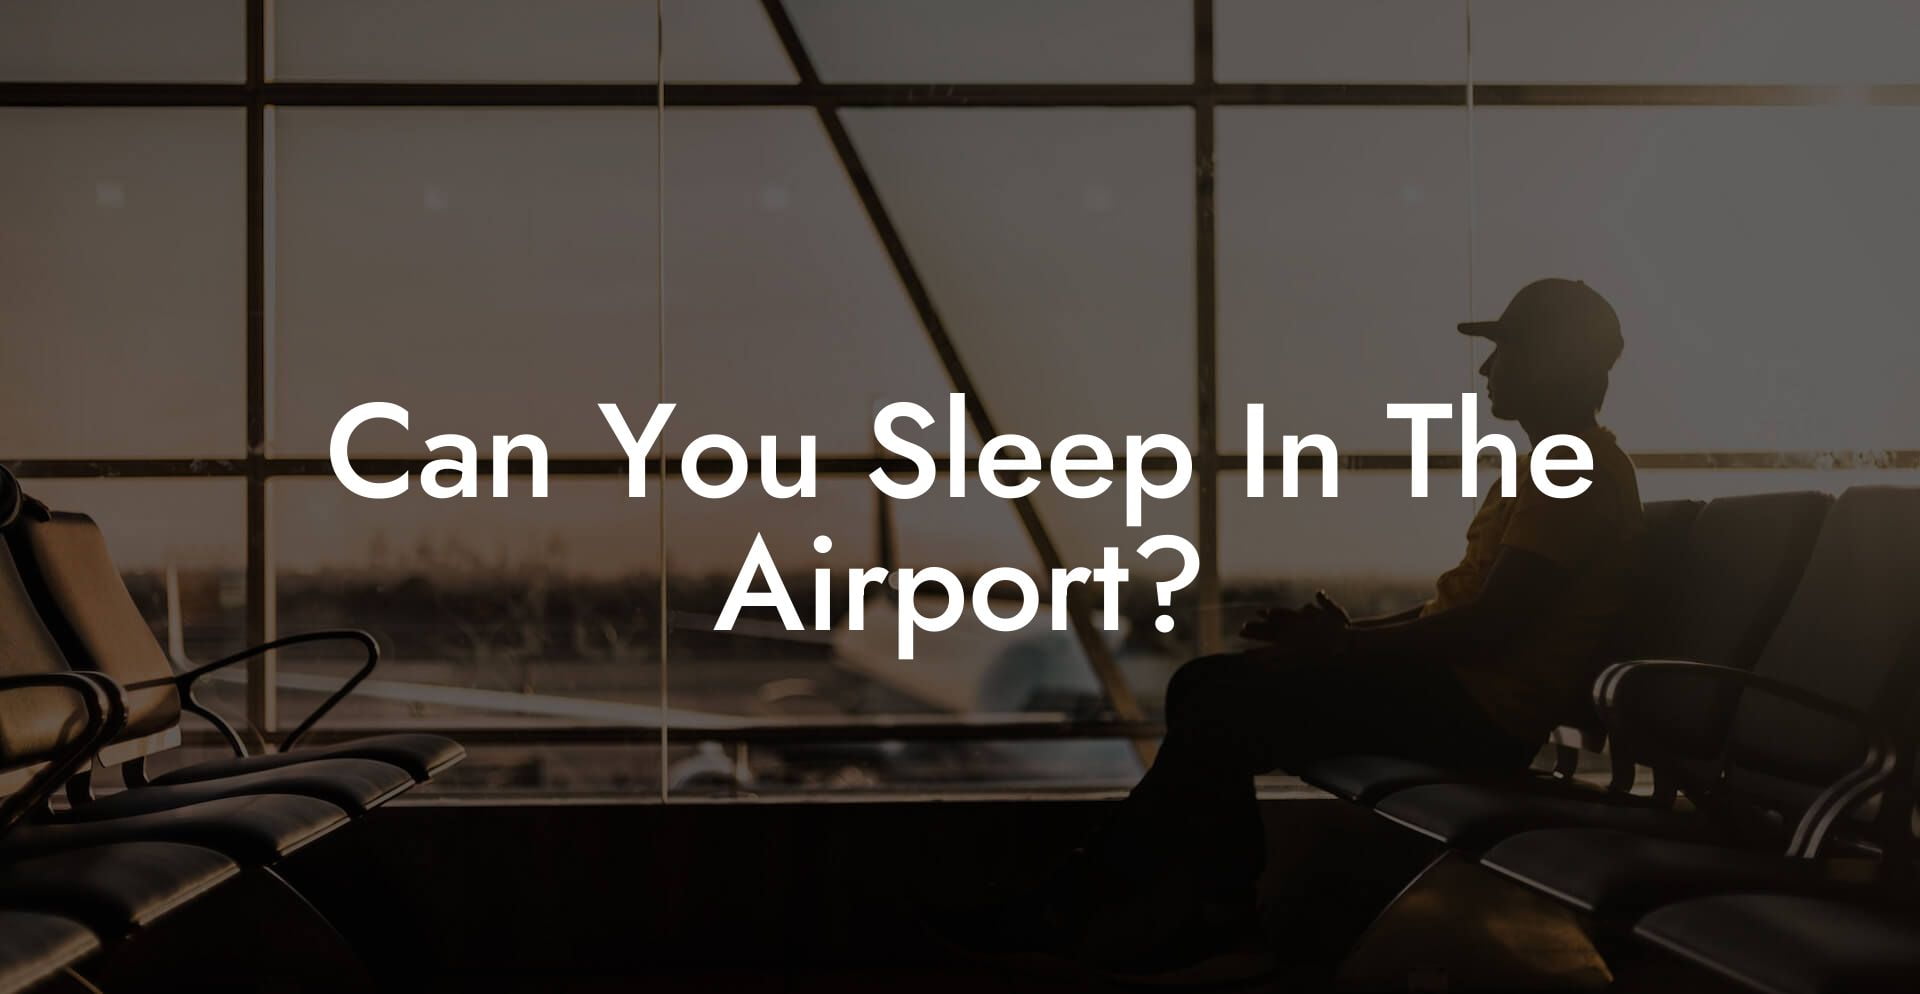 Can You Sleep In The Airport?